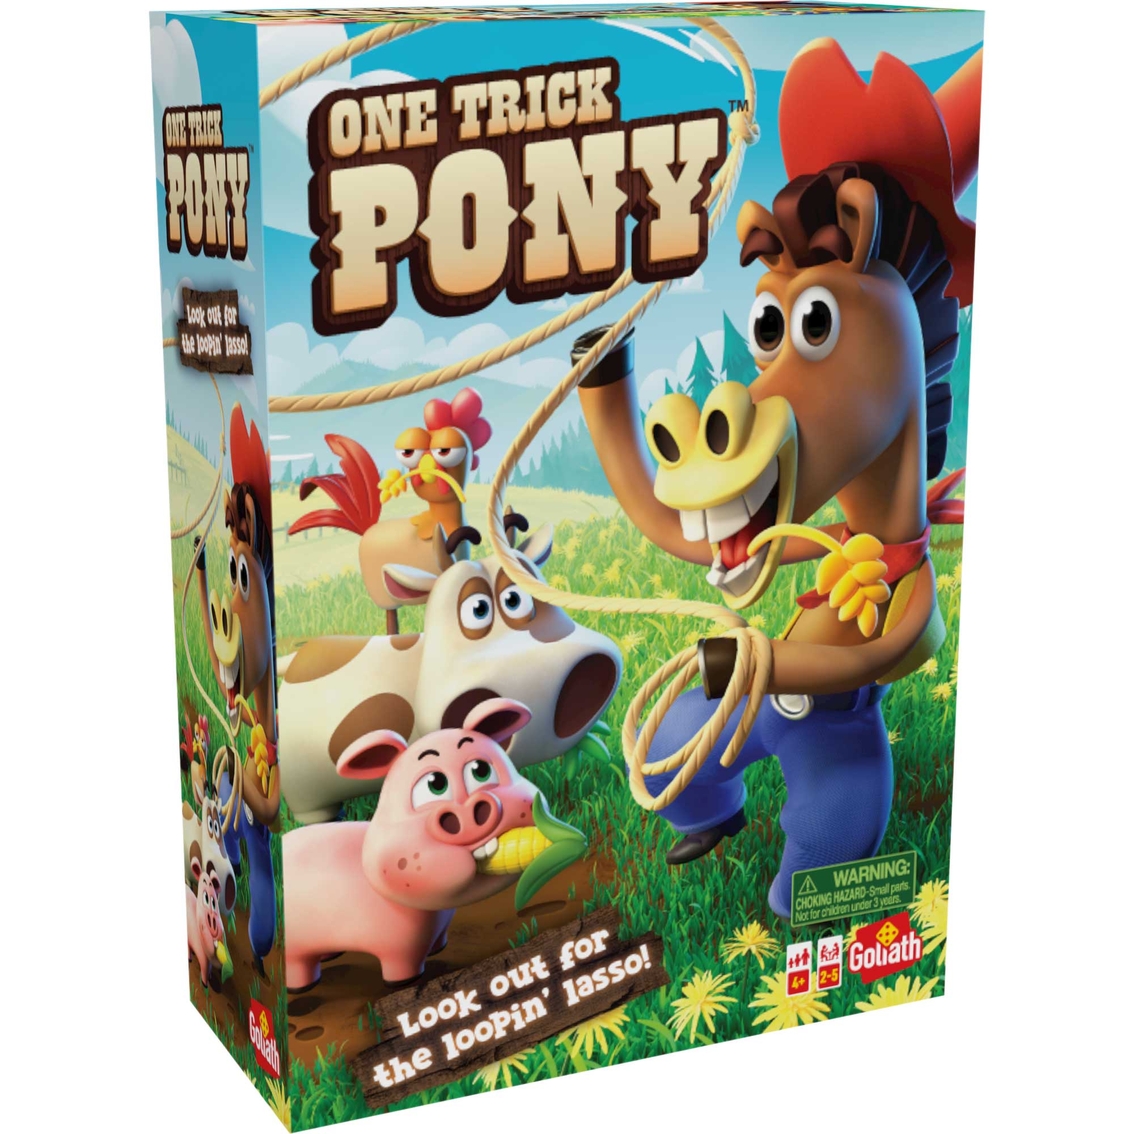 Goliath Games One Trick Pony Game - Image 2 of 5